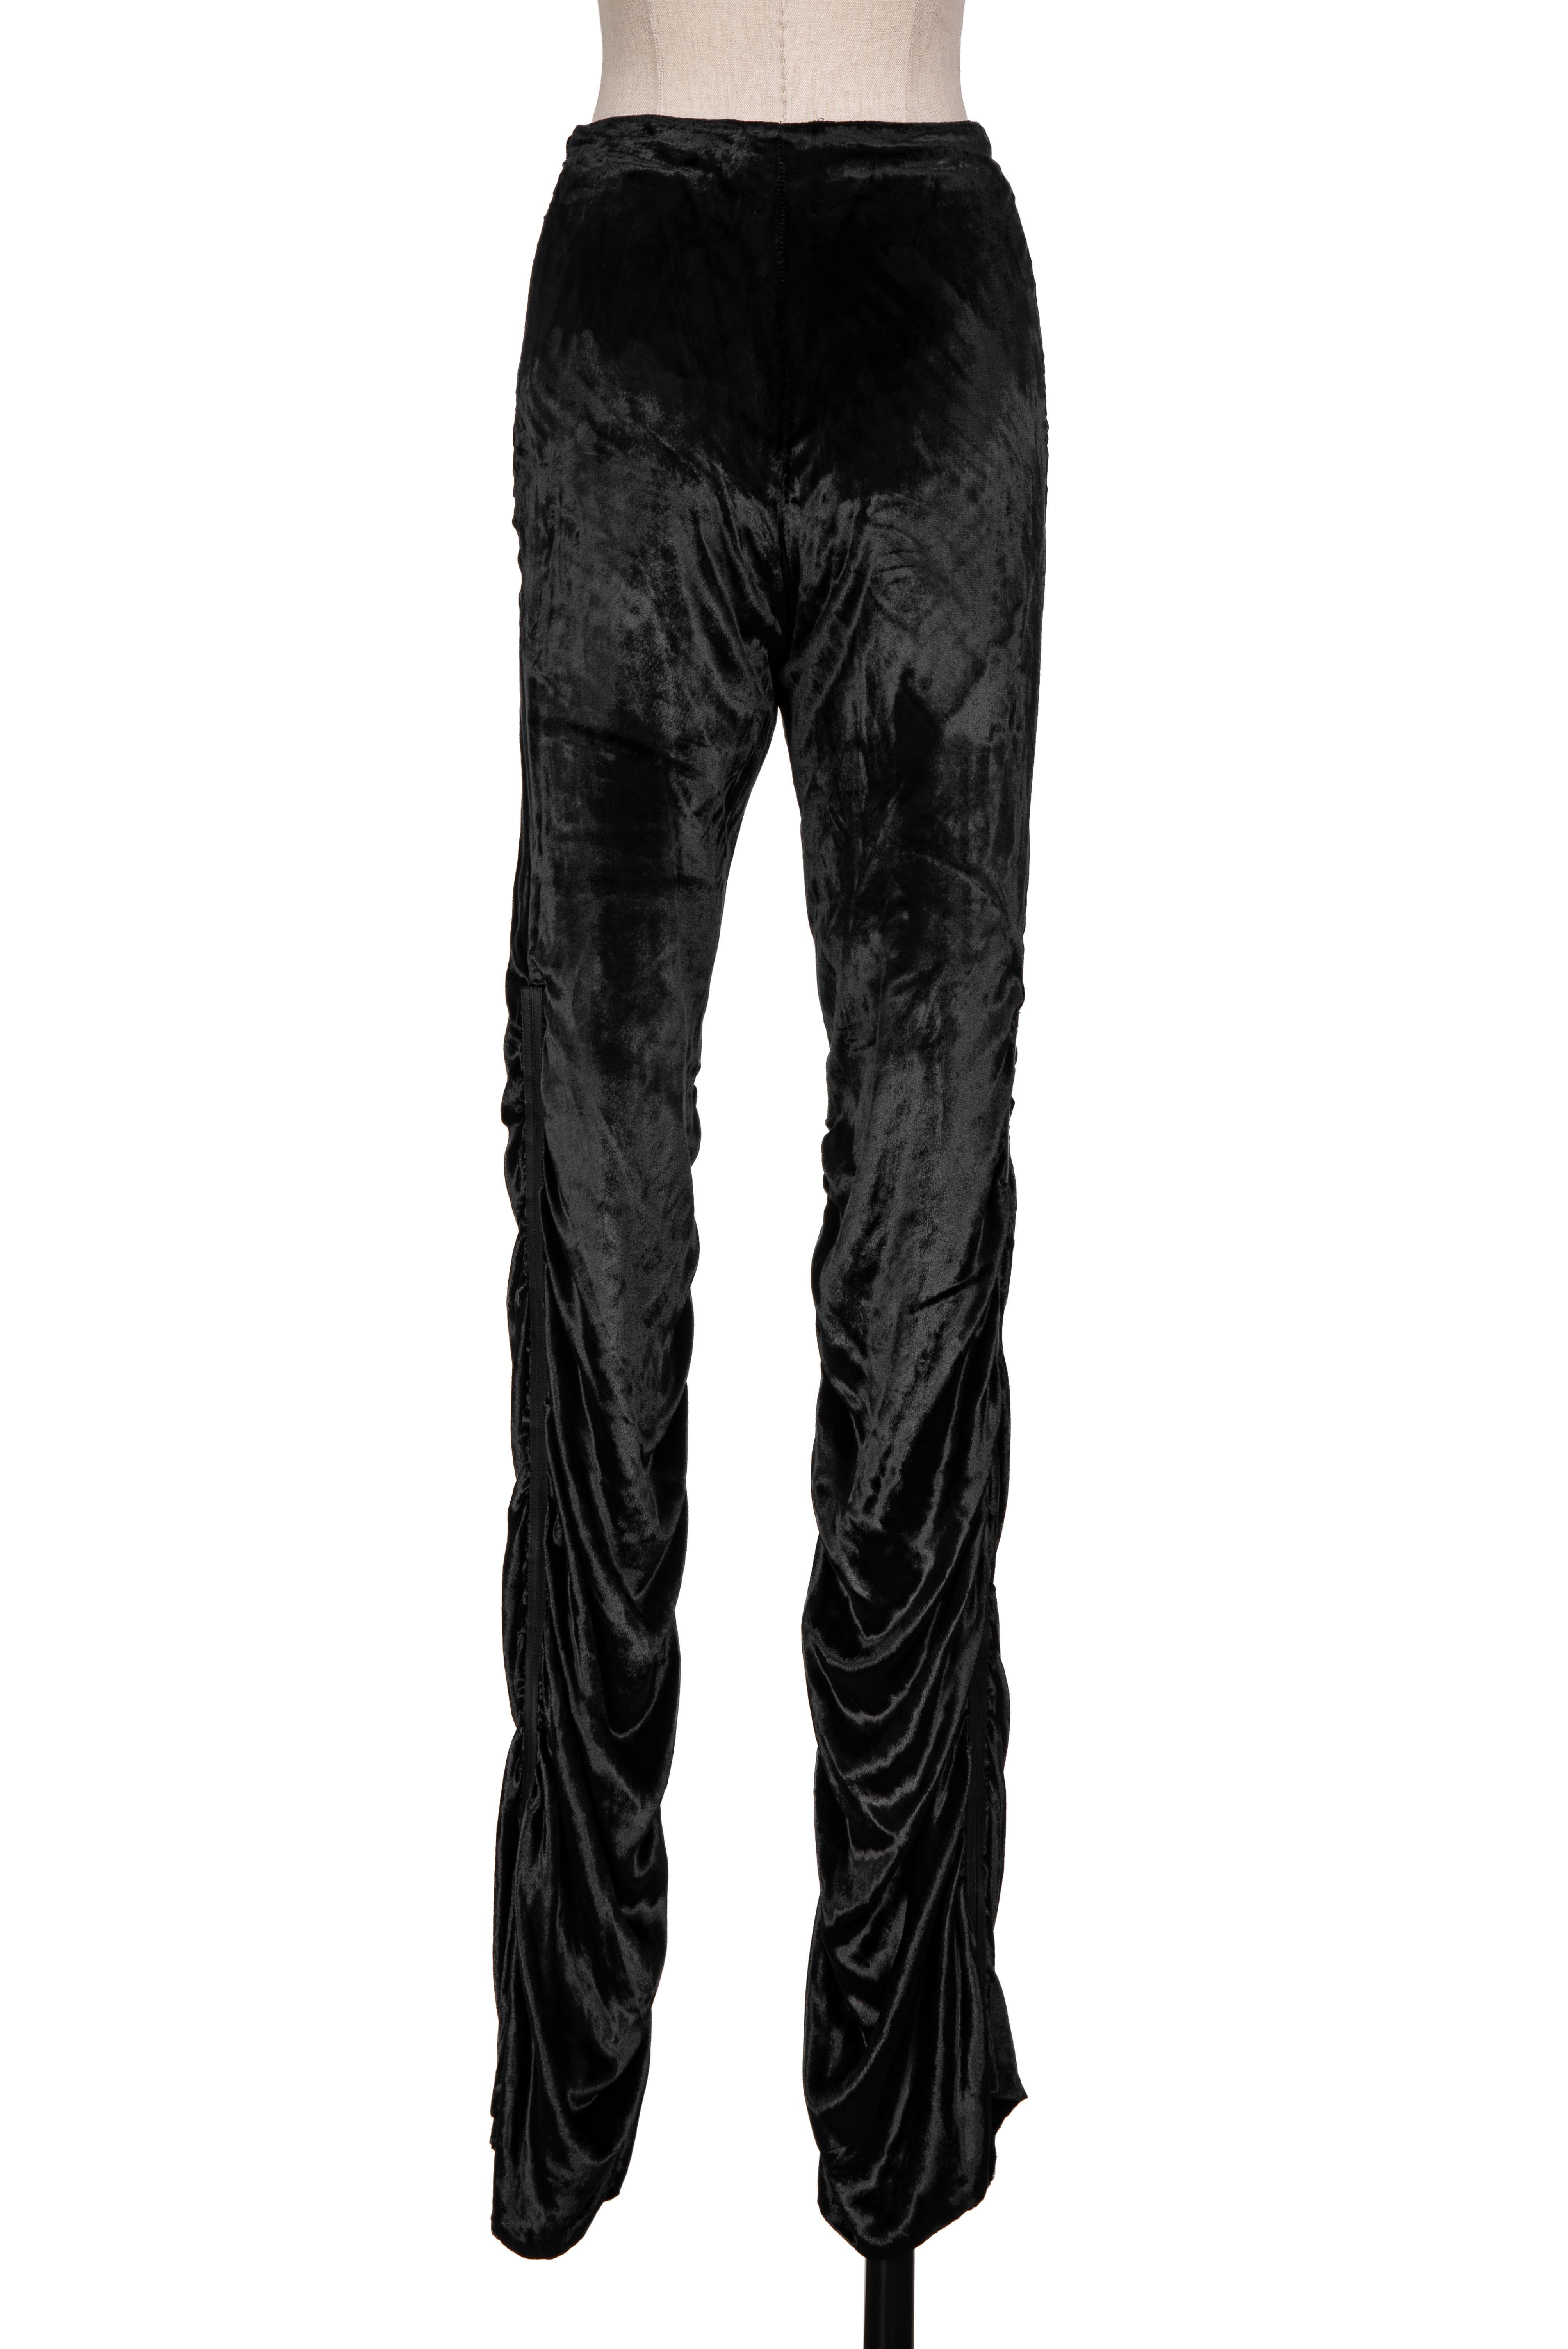 Fall 1999 GUCCI Tom Ford Documented Draped Black Velvet Leather Strip Trousers For Sale 1